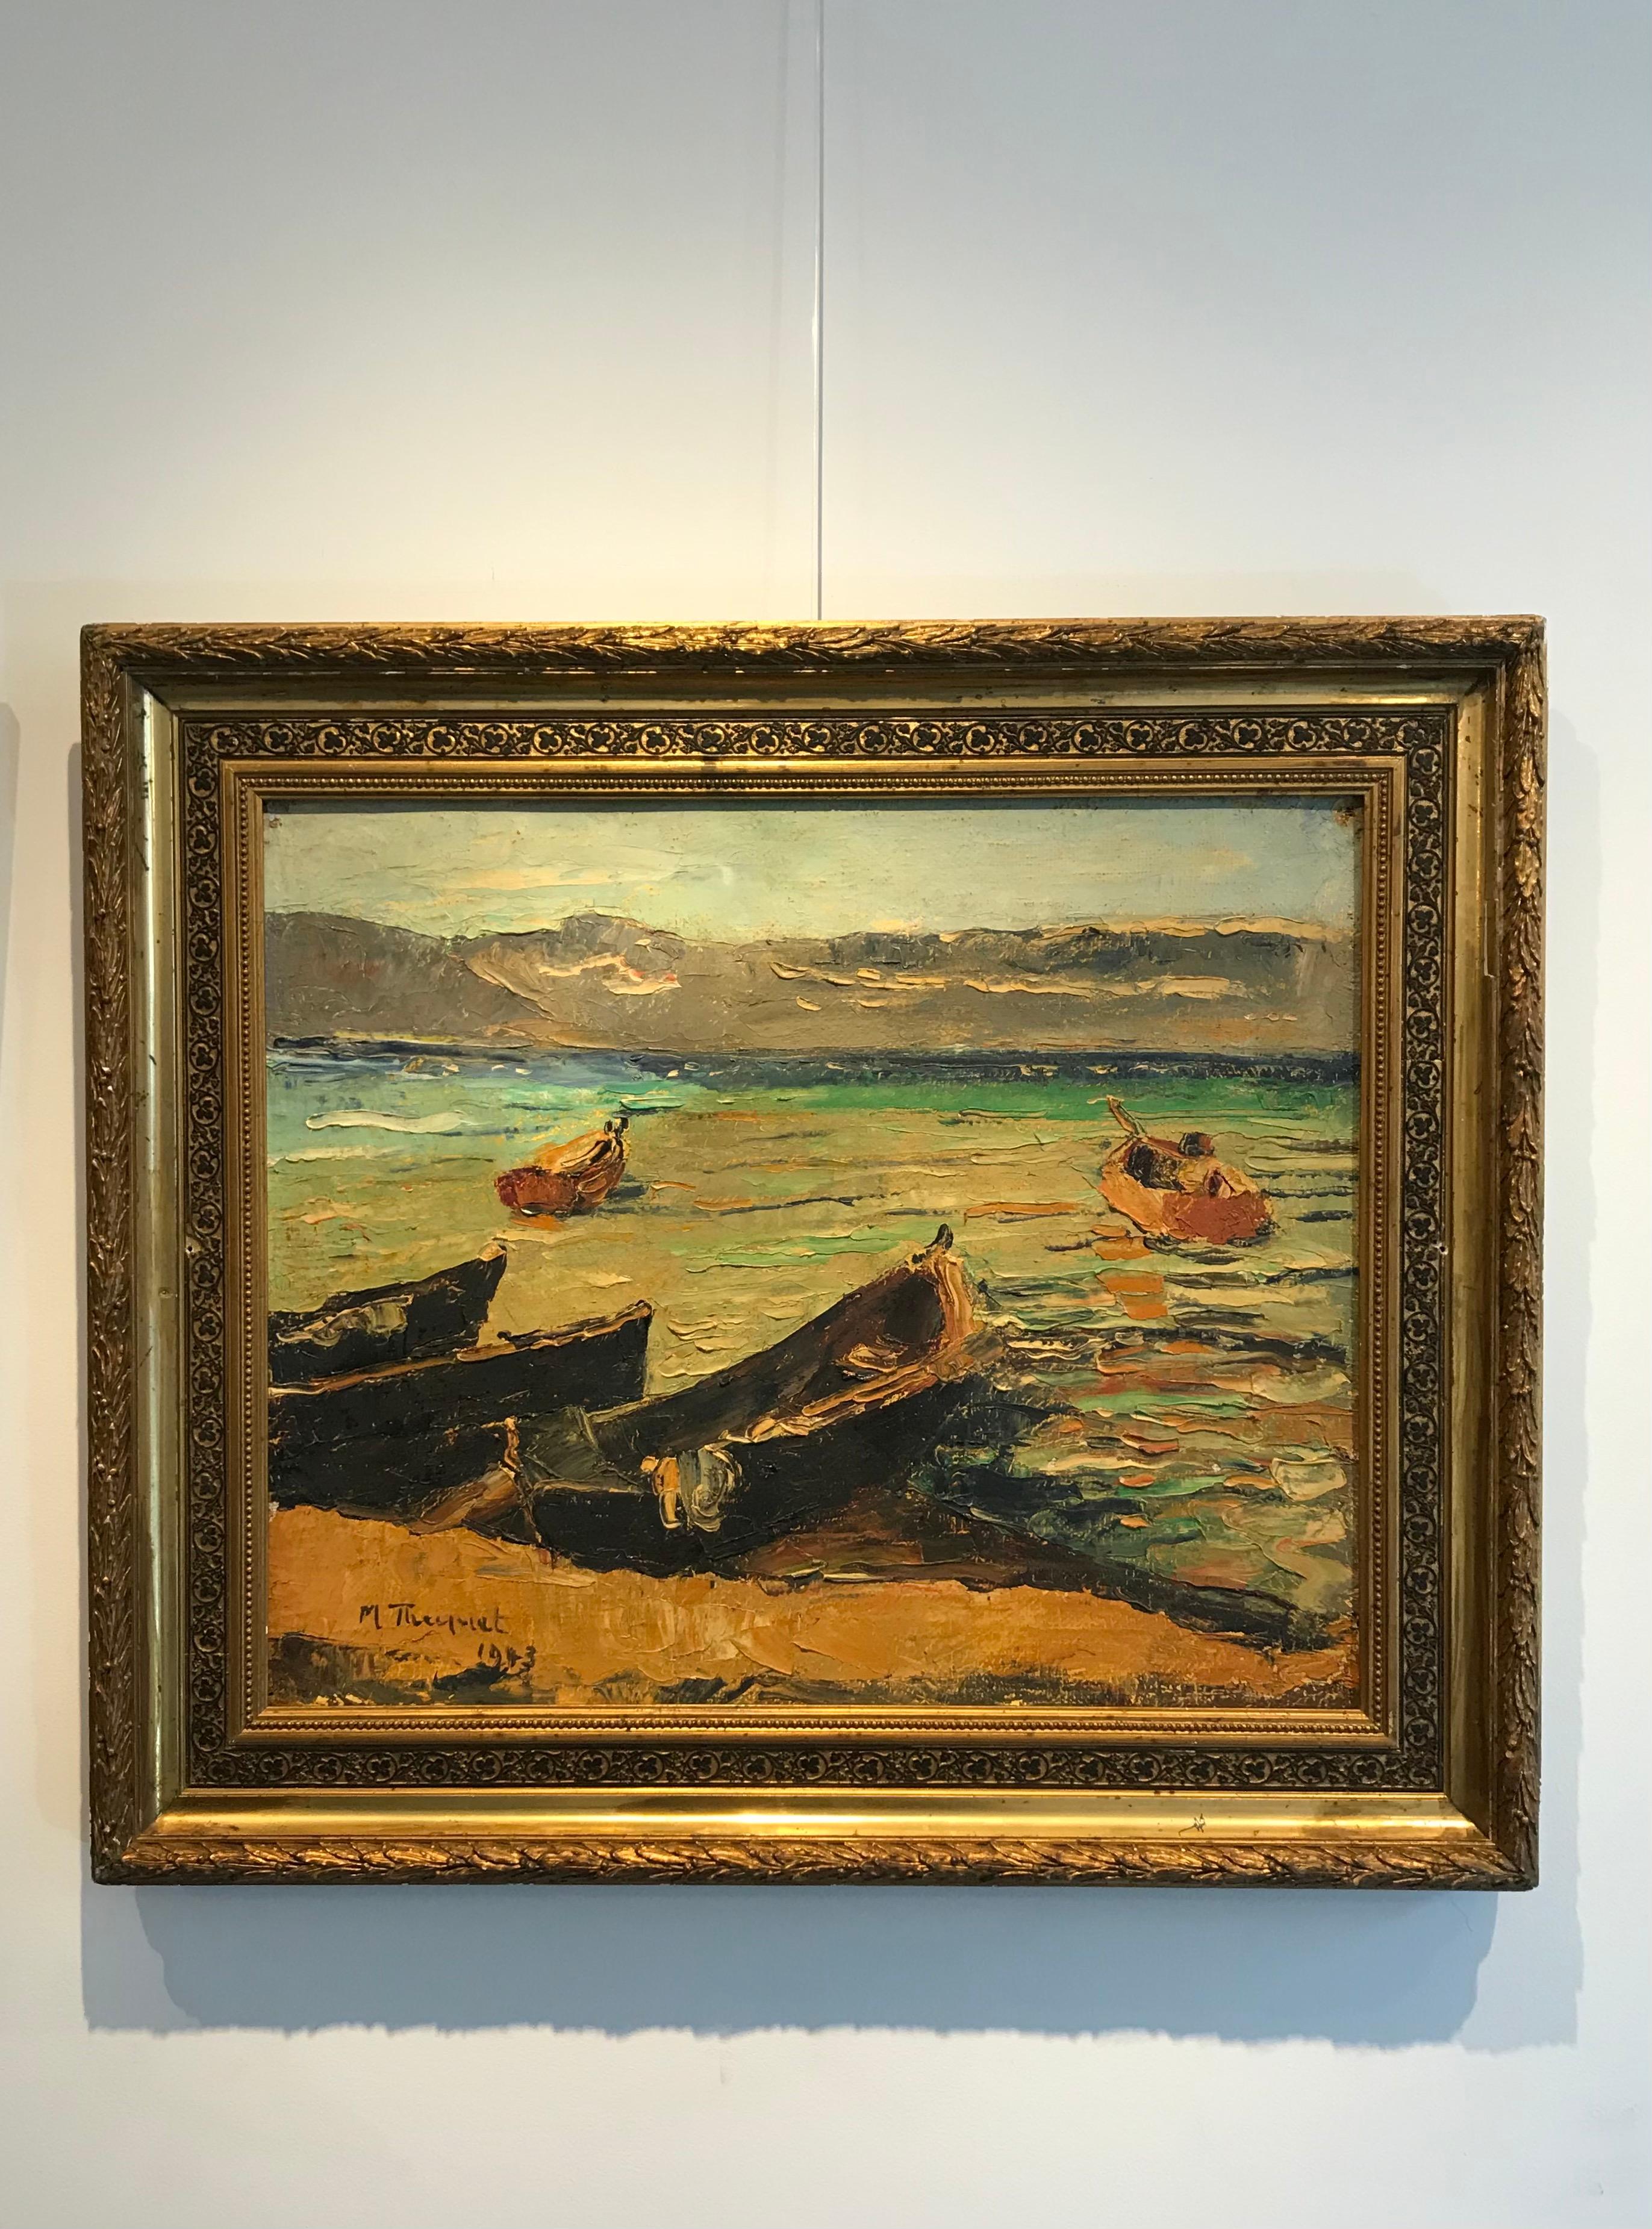 Boats on Lake Neuchâtel, Switzerland - Painting by Max Theynet